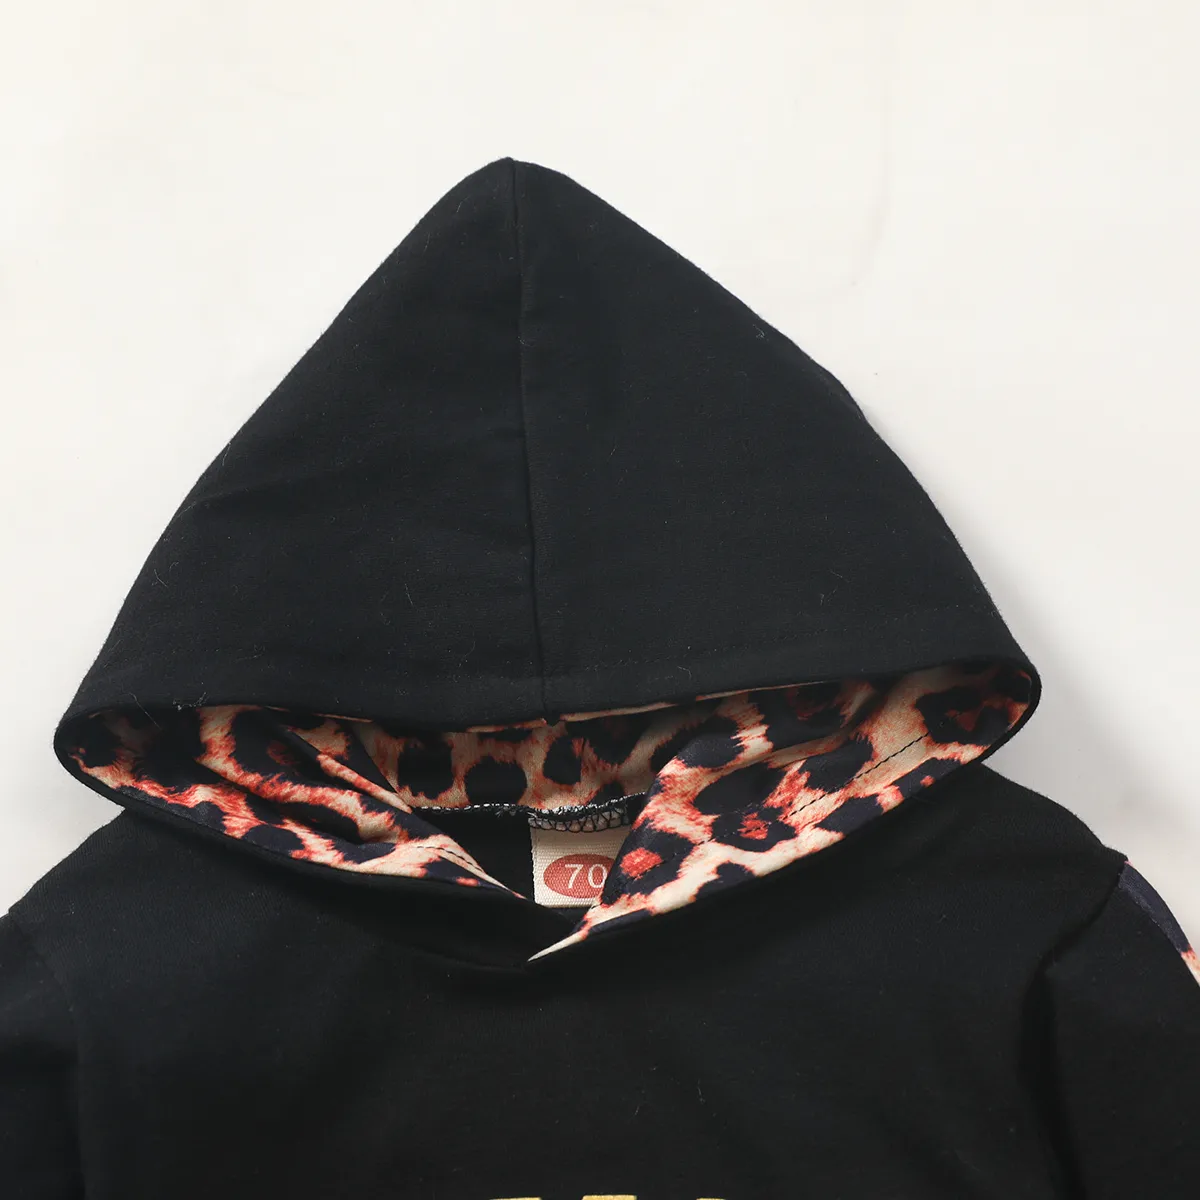 100% Cotton 3pcs Leopard and Letter Print Hooded Long-sleeve Baby Set Black big image 1